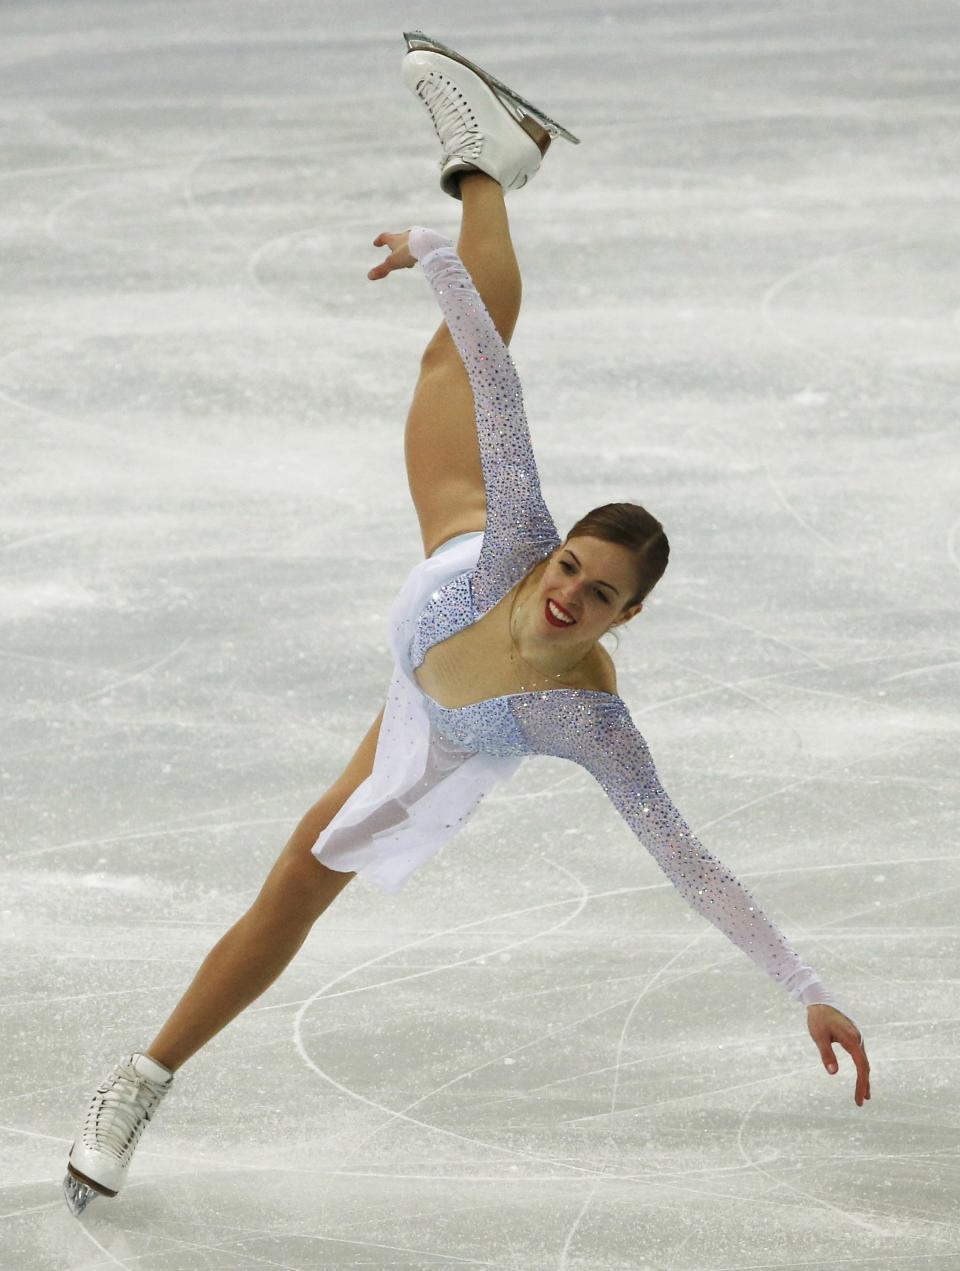 Carolina Kostner of Italy competes during the Team Ladies Short Program at the Sochi 2014 Winter Olympics, February 8, 2014. REUTERS/David Gray (RUSSIA - Tags: SPORT FIGURE SKATING SPORT OLYMPICS)